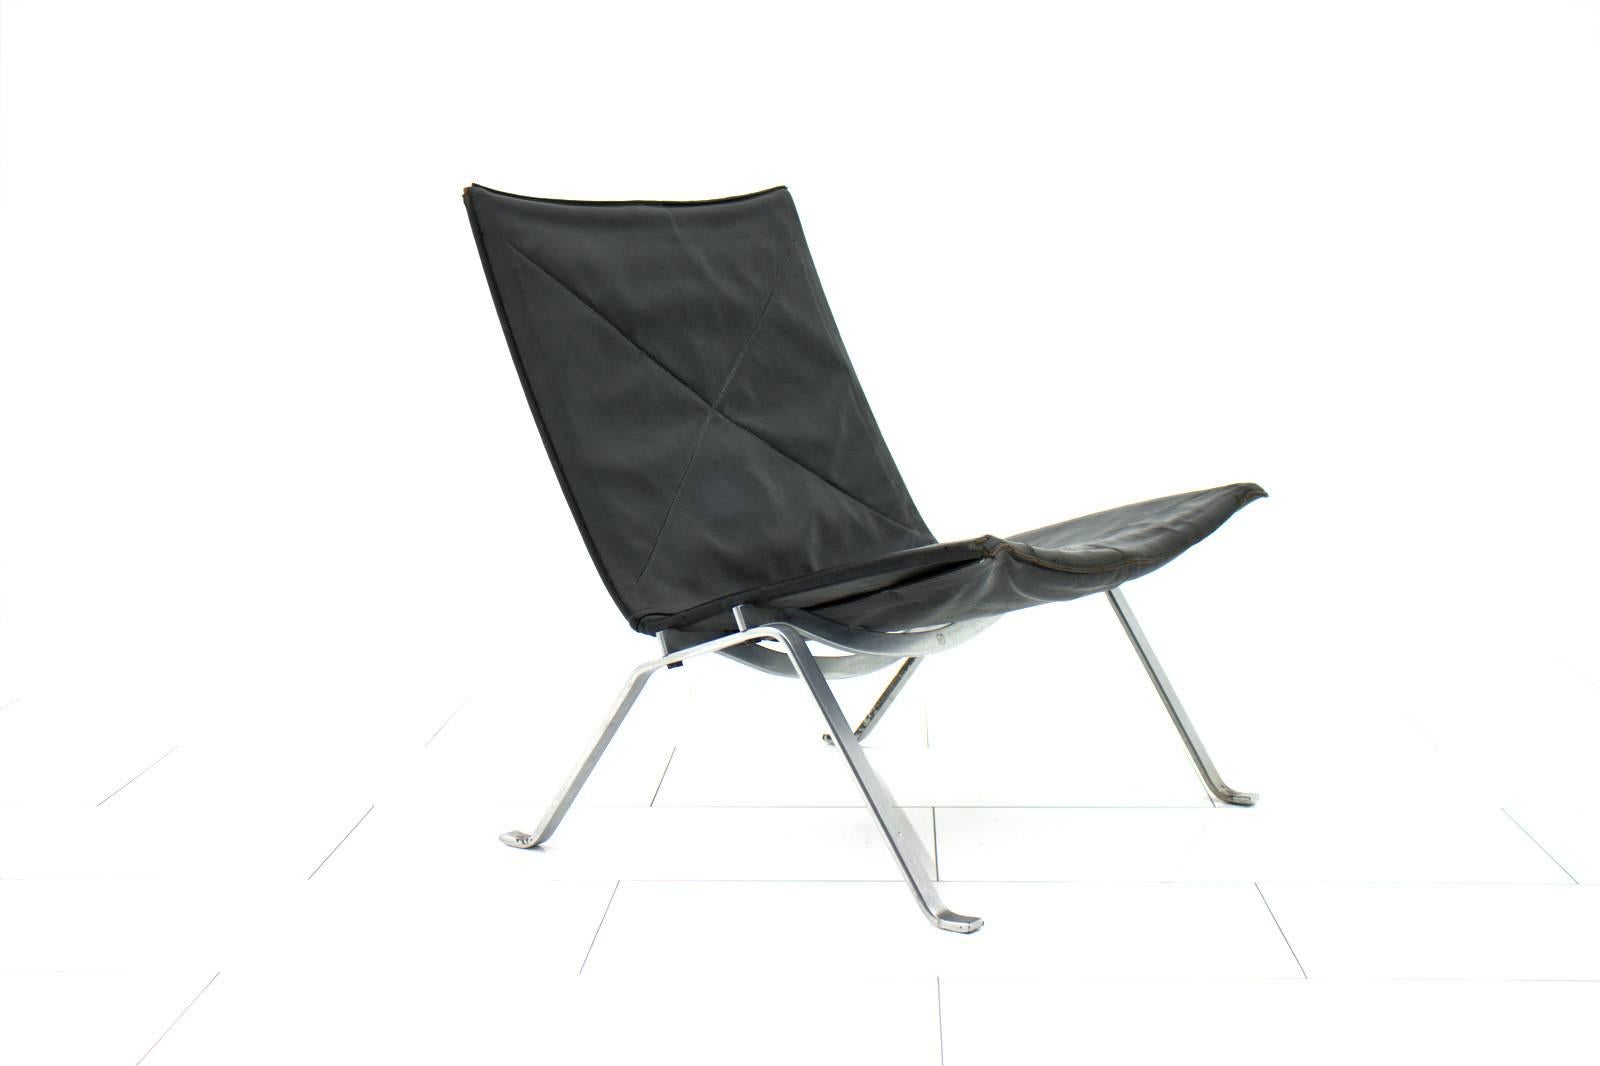 Early PK 22 lounge chair by Poul Kjaerholm, E. Kold Christensen, Denmark, 1955. Original vintage condition without any restoration.
Measurement: H 71 cm, B 63 cm, T 63 cm.
Great Chair!

Worldwide shipping.